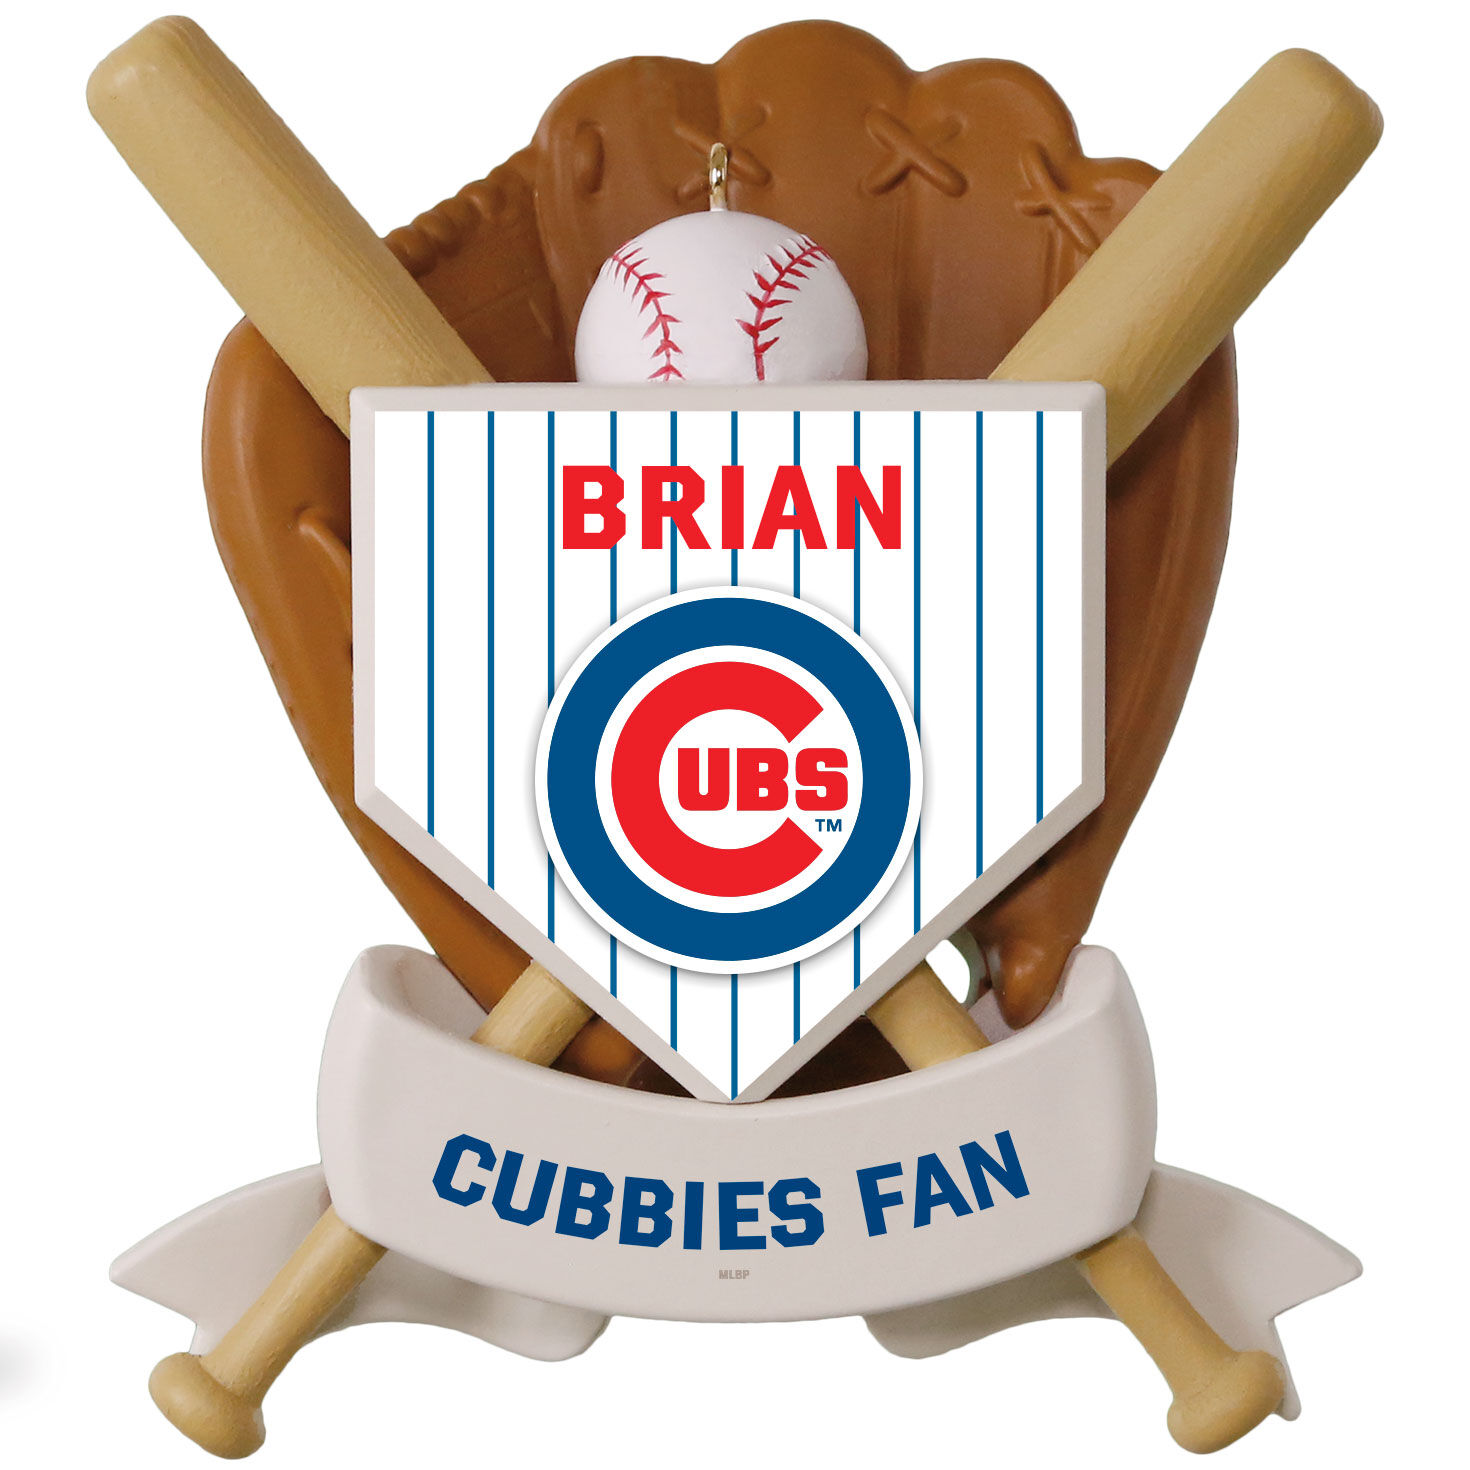 Chicago Cubs Everything on Pinterest, Cubbies, Baseball and